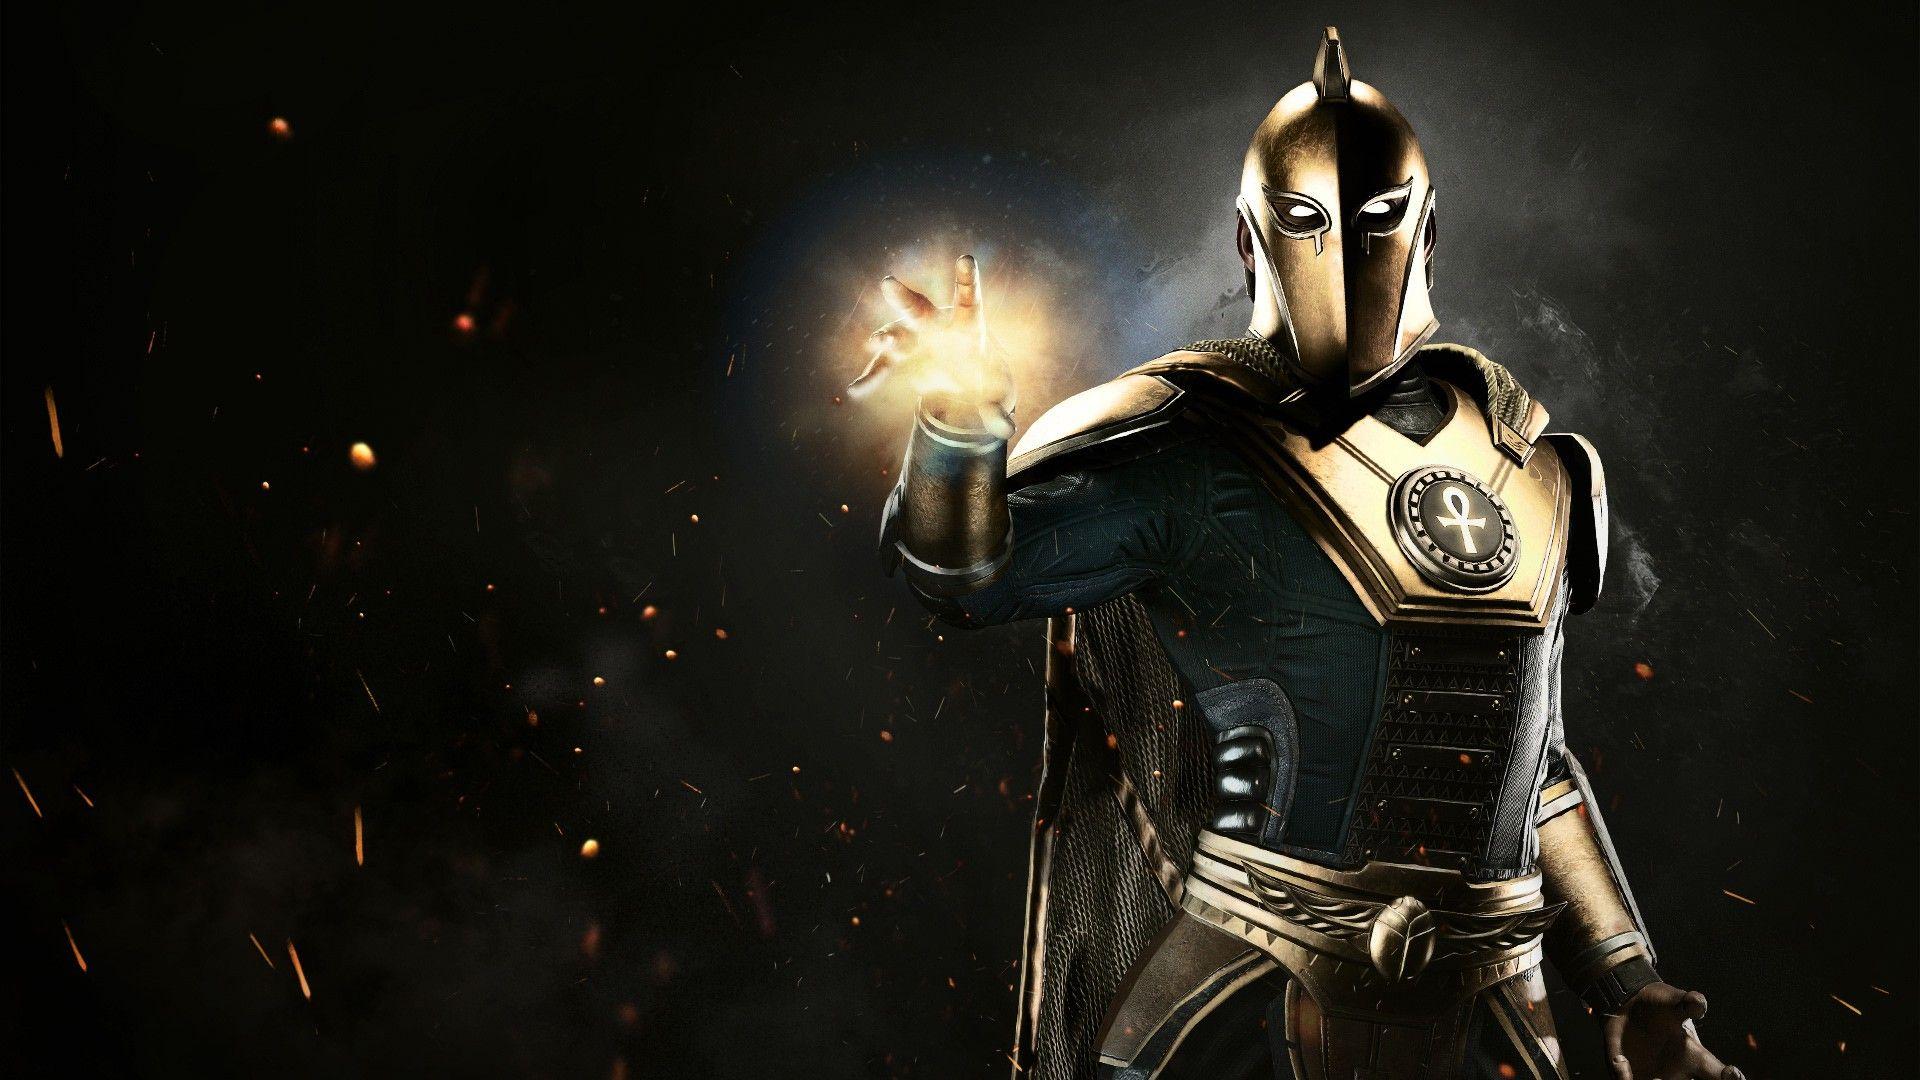 Doctor Fate in Injustice 2 Game 1080P HD Wallpaper